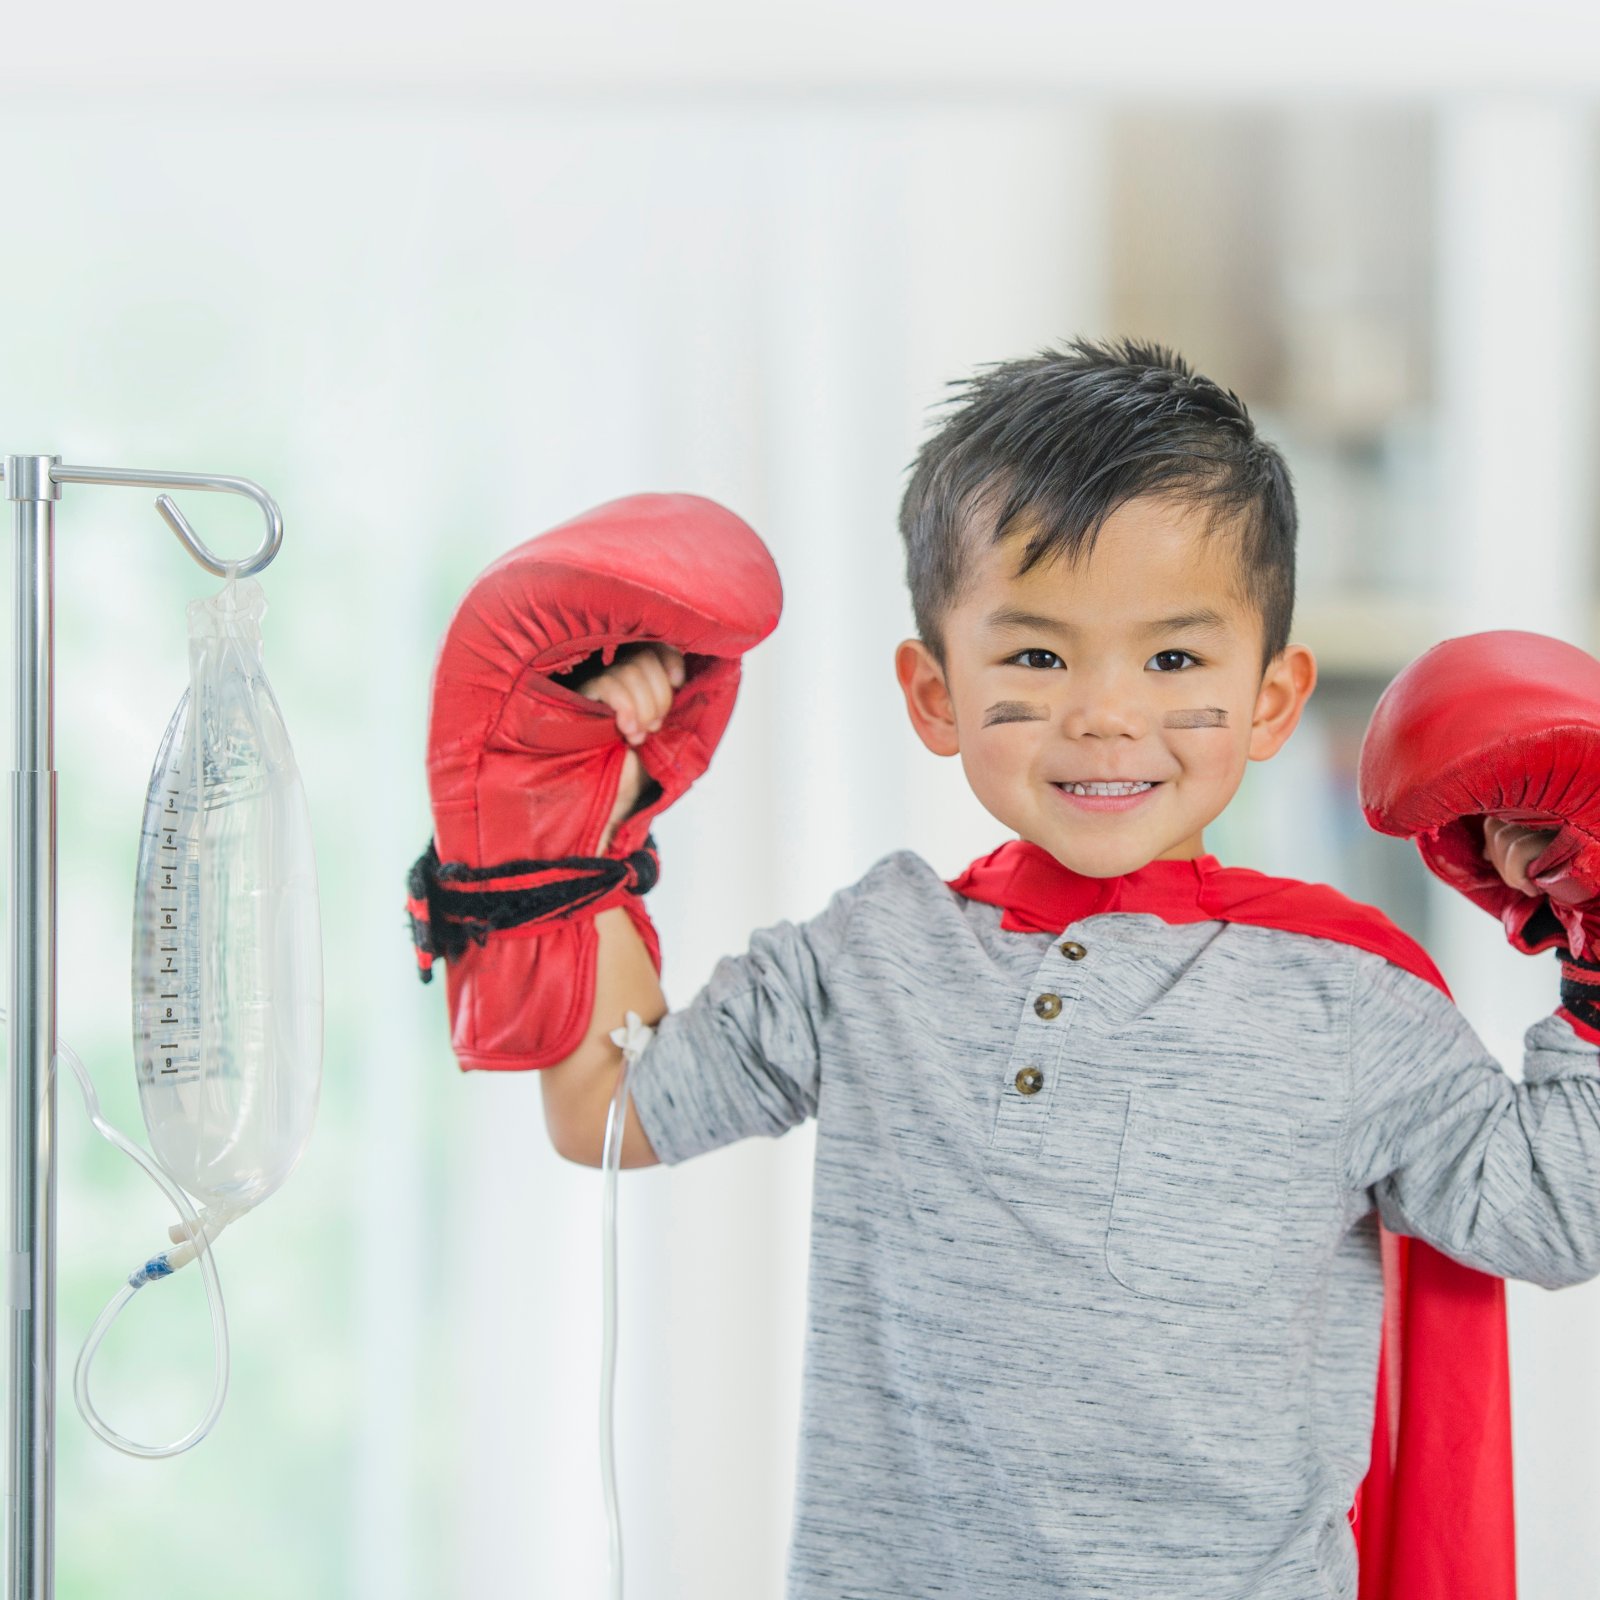 Little boy getting iv treatment wearing cape and boxing gloves